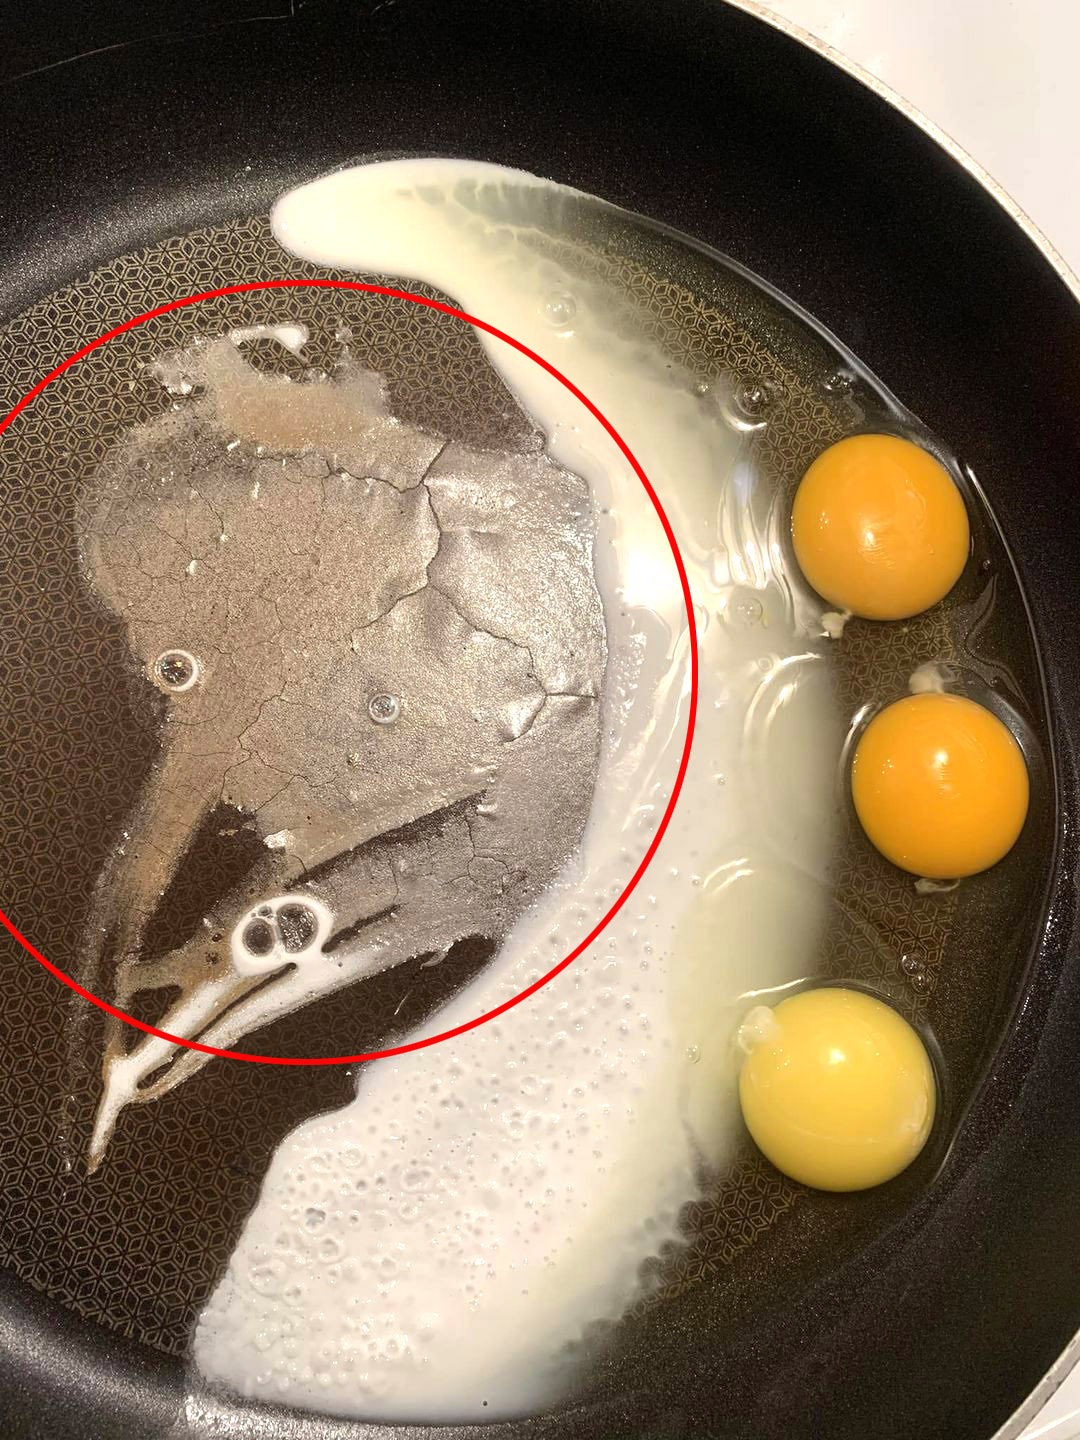 The fried eggs that resemble Mr Burns.